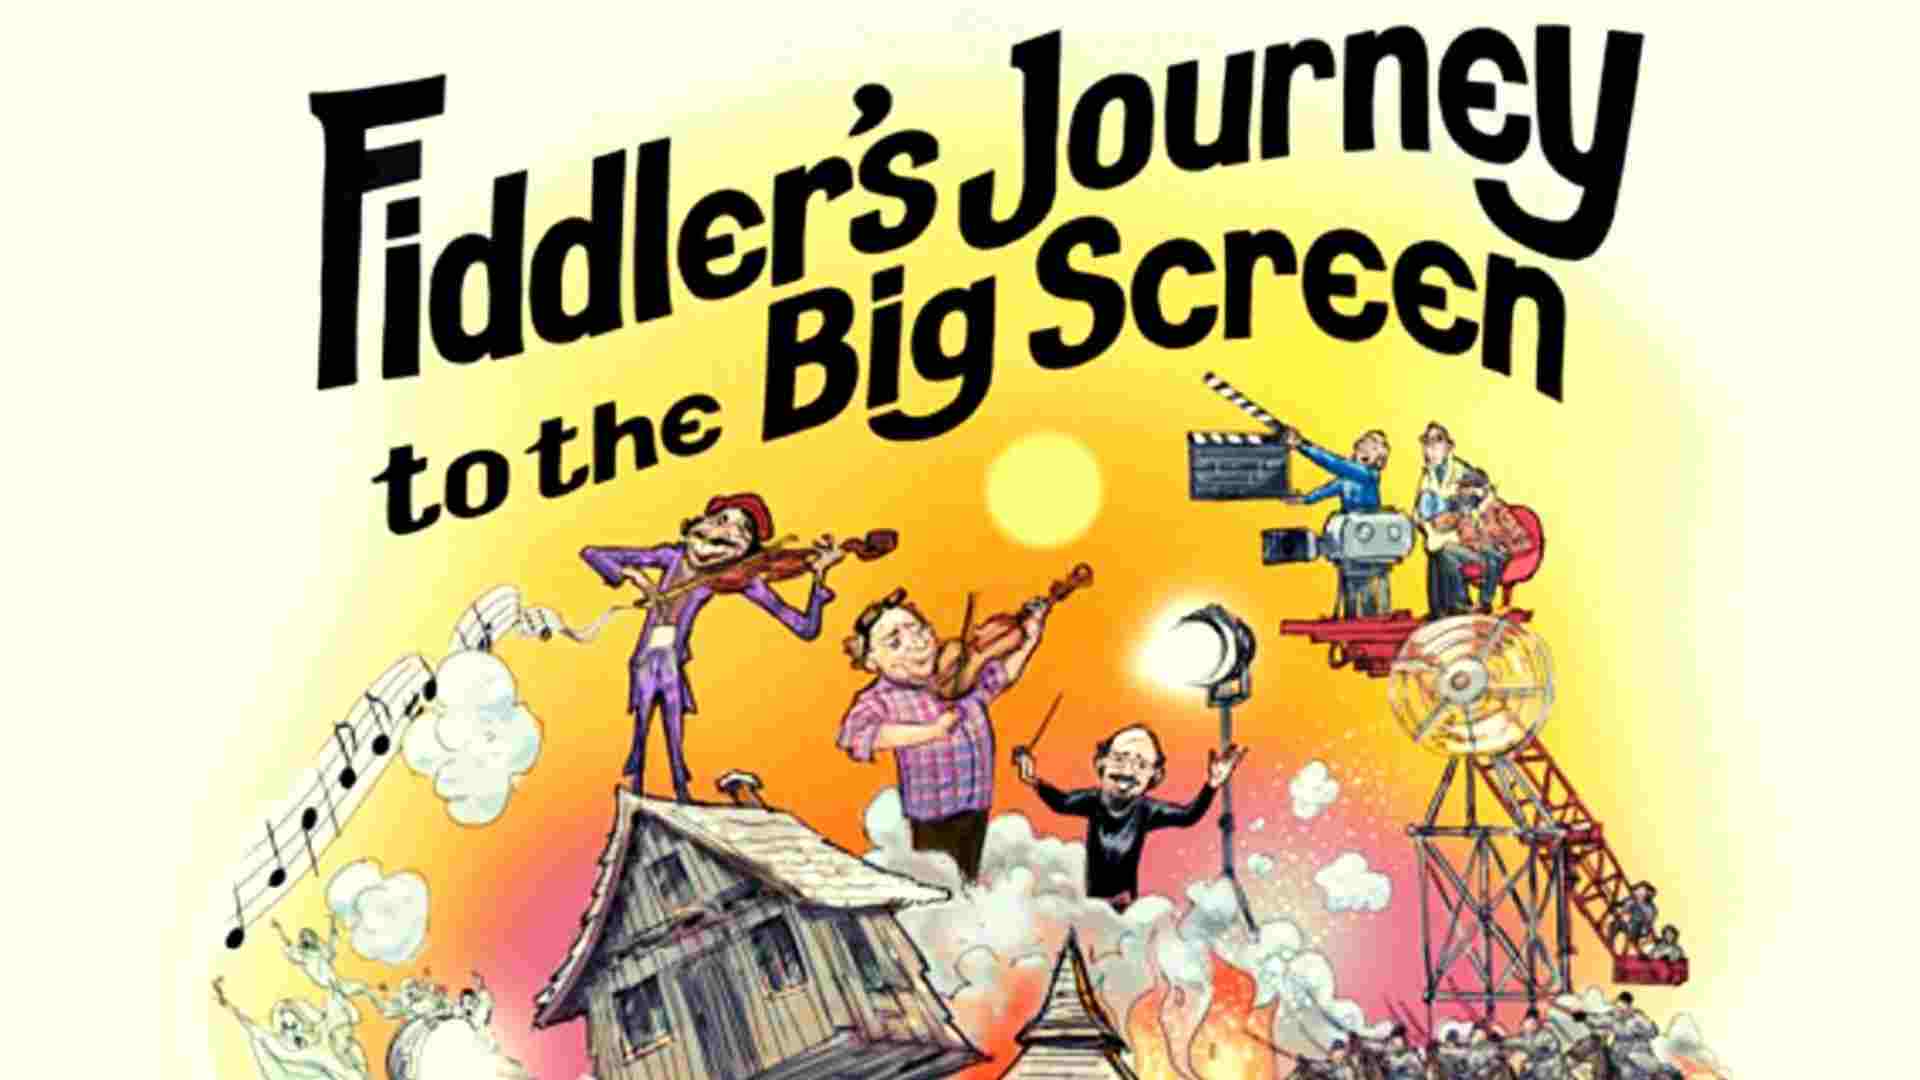 Fiddler's Journey to the Big Screen Parents guide and Age Rating | 2022